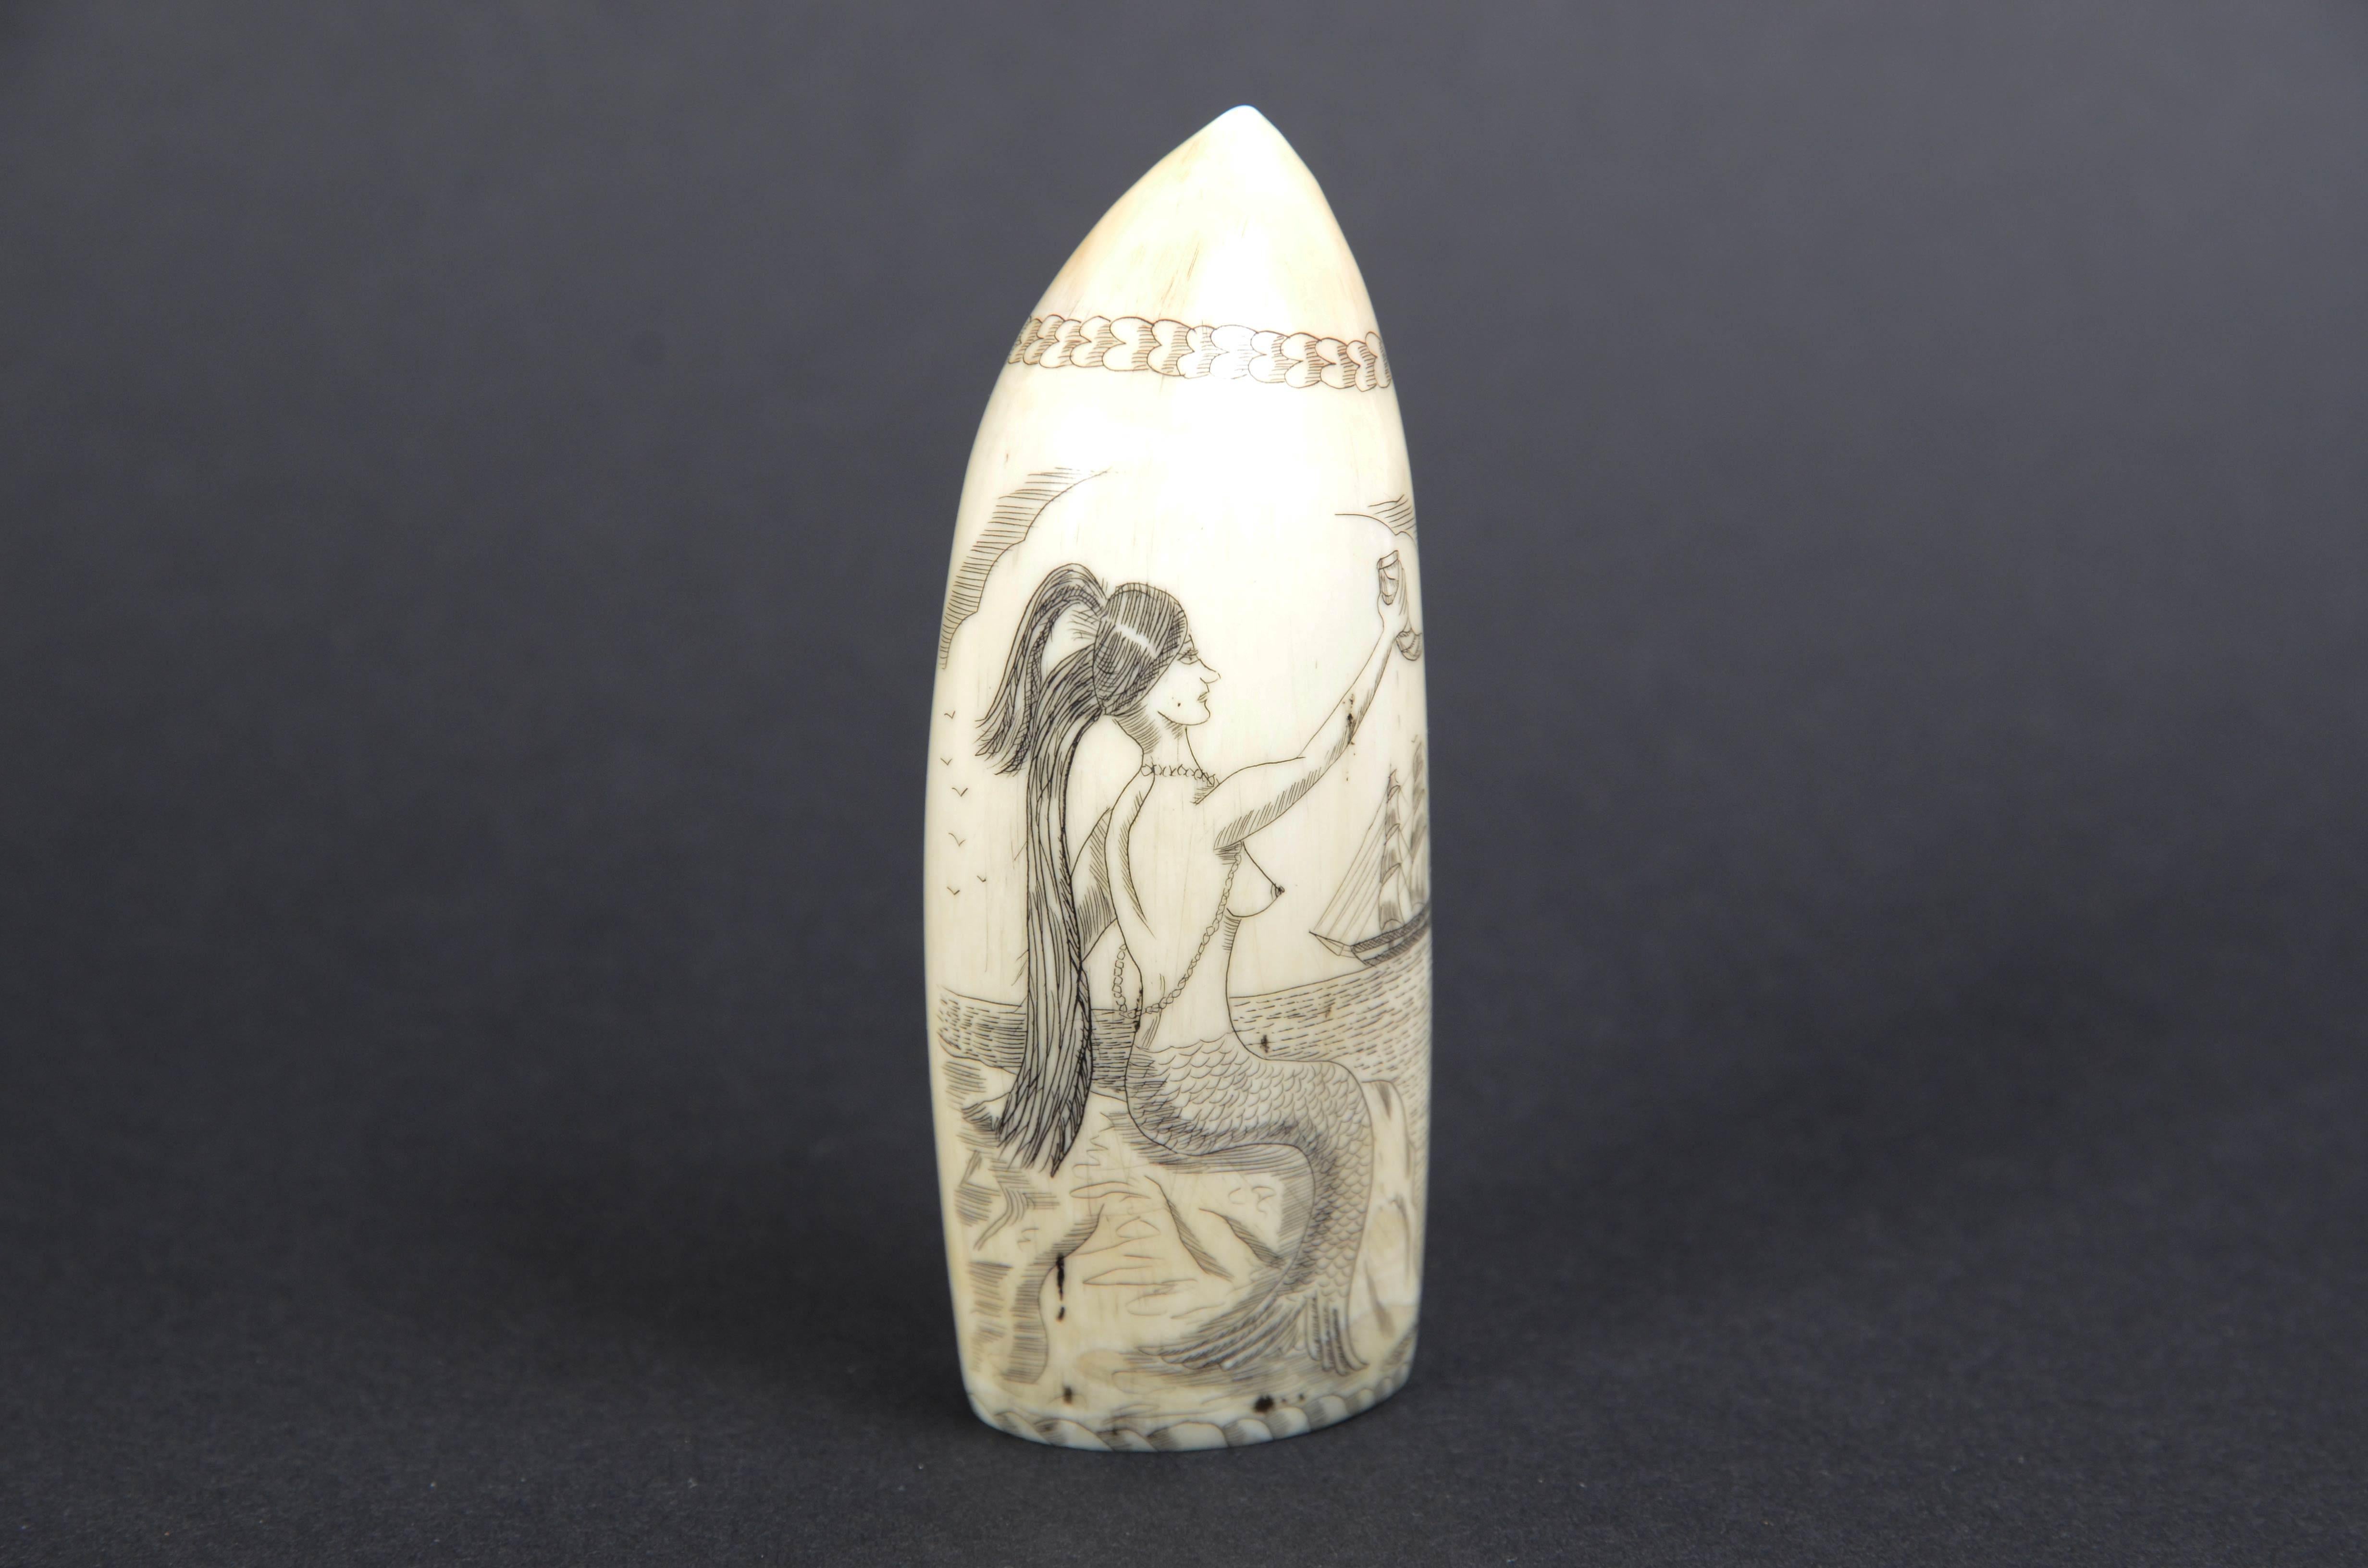 Scrimshaw of a vertically engraved whale tooth datable to around the mid-19th century, depicting mermaid with lower part of fish body and upper part nude female figure with uncovered breasts long hair and a cornucopia in her hand raised high in the